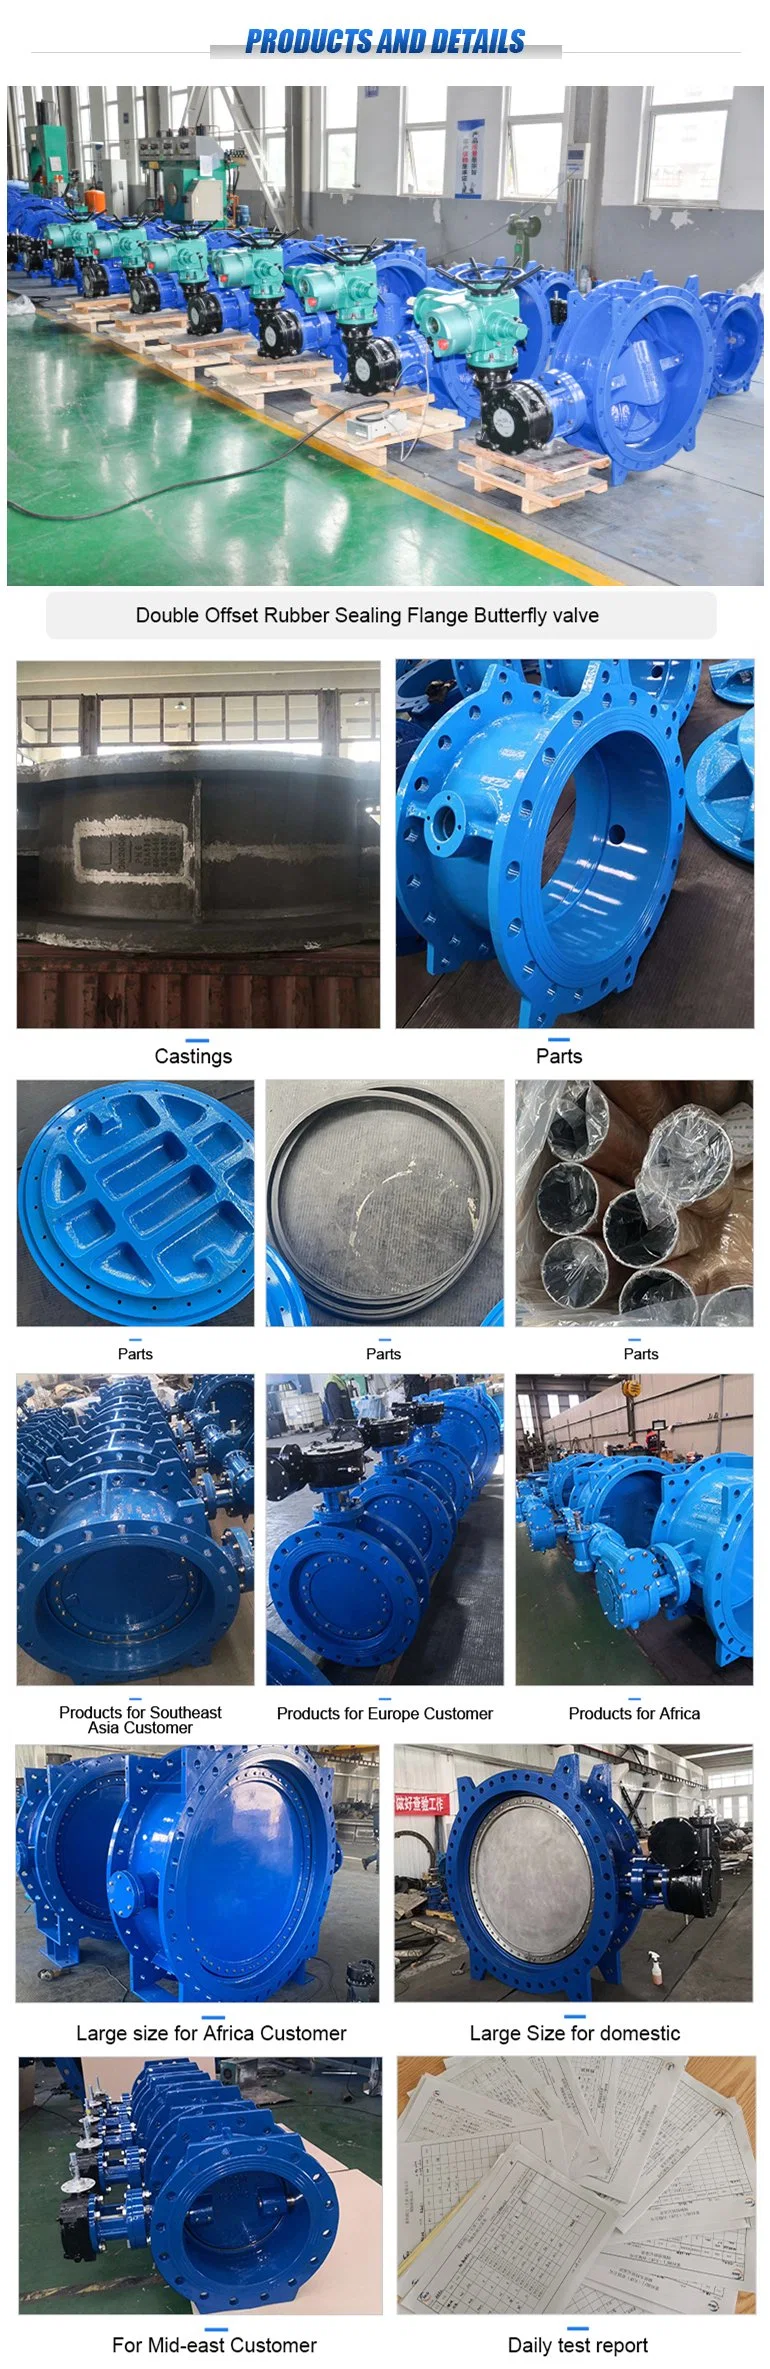 High Performance Flowseal Double Flange Triple Eccentric Butterfly Valve Gear Operated